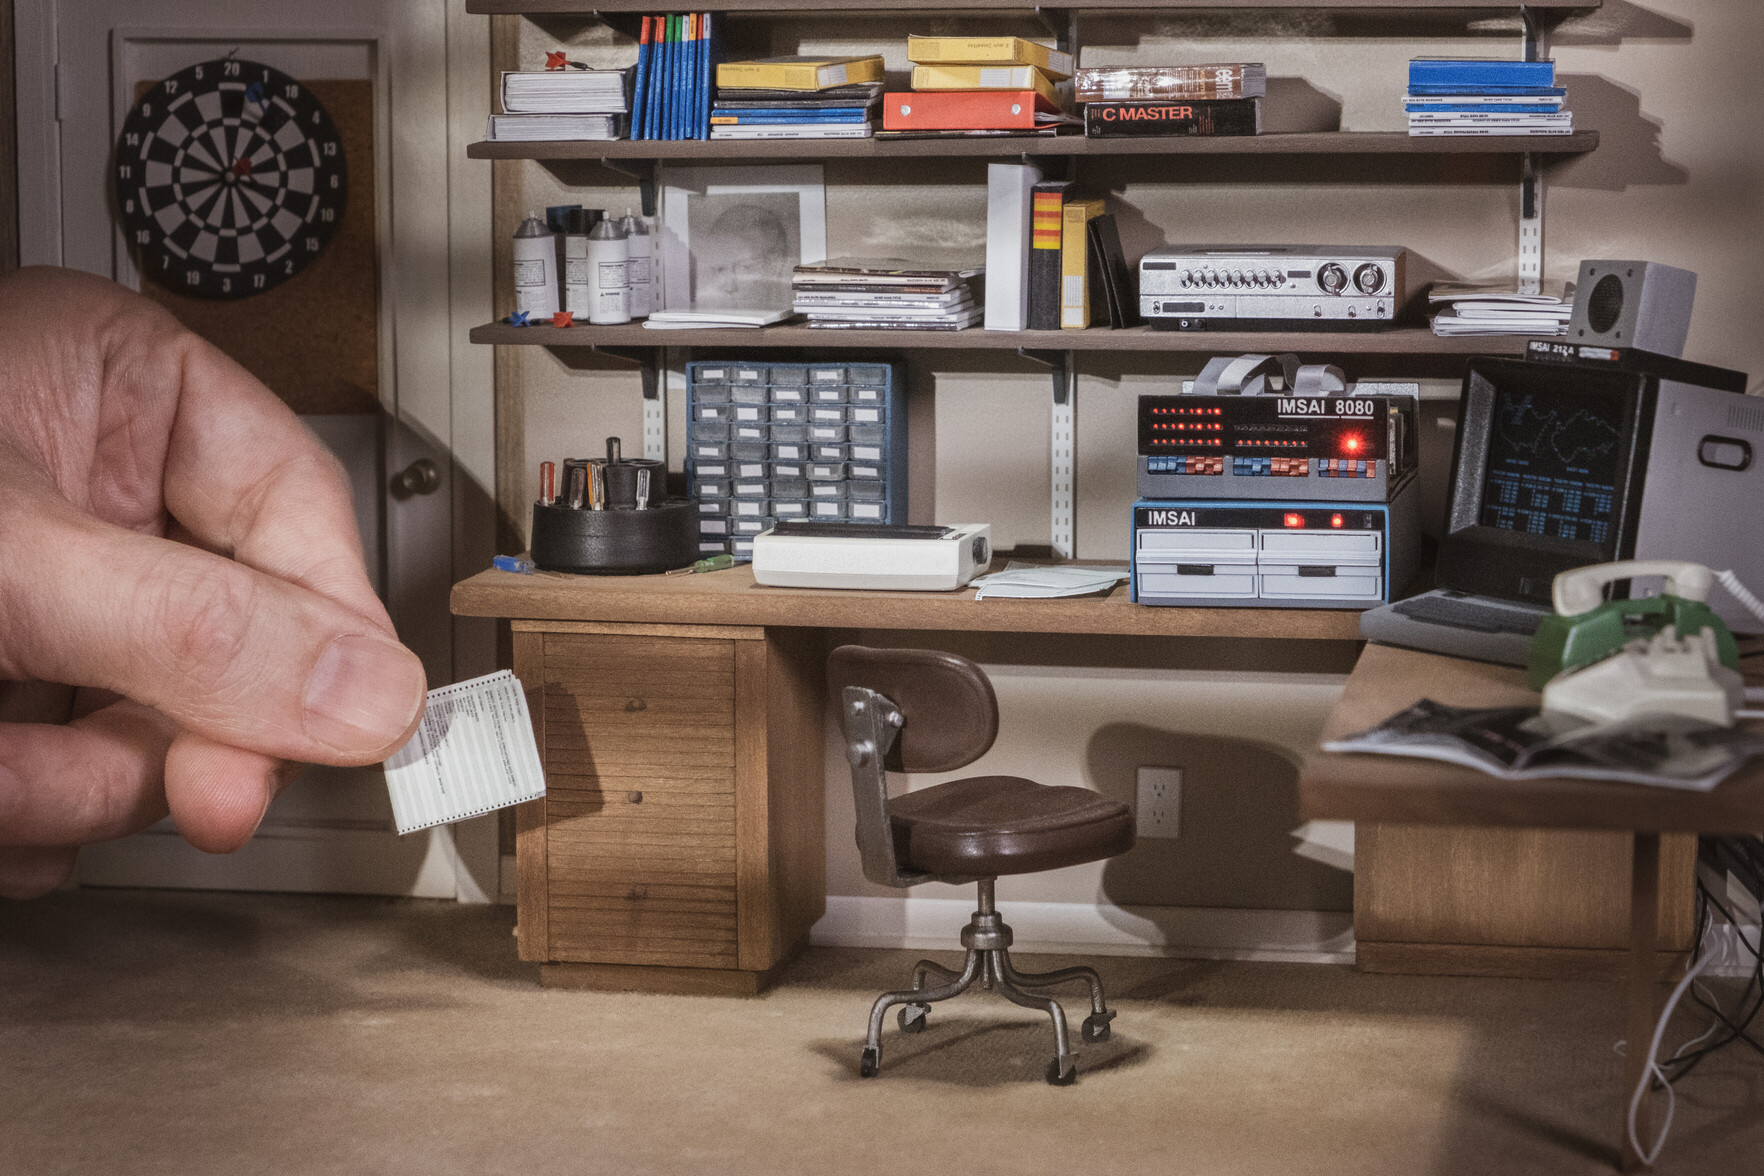 Miniature 1:12 scale model of David Lightman bedroom from the movie Wargames from 1983. A normal sized hand is seen entering the frame of the picture from the left, holding a miniature printout paper.